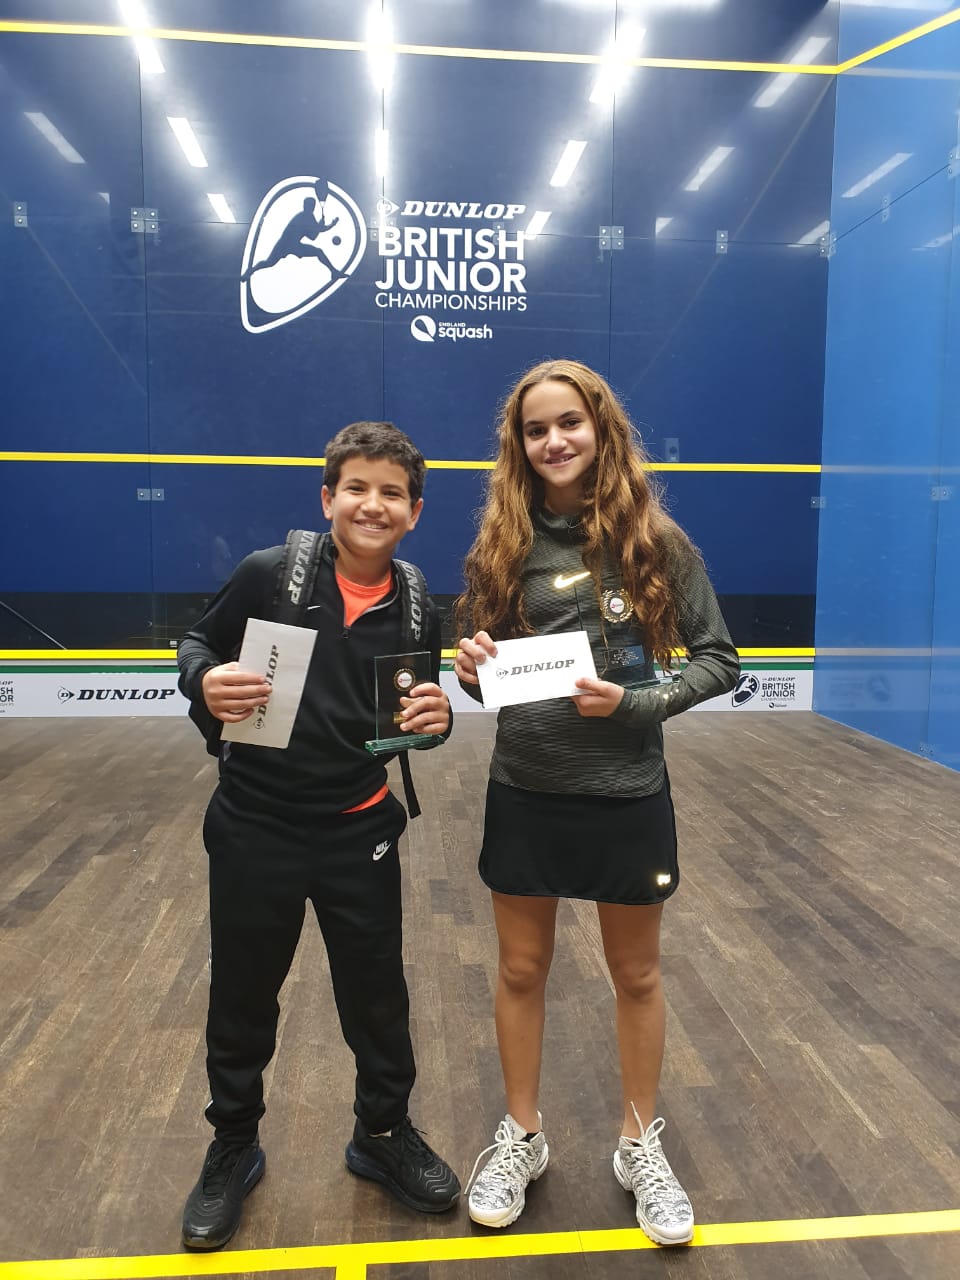 A Standout Performance for Middlesex Juniors at the British Junior Championships